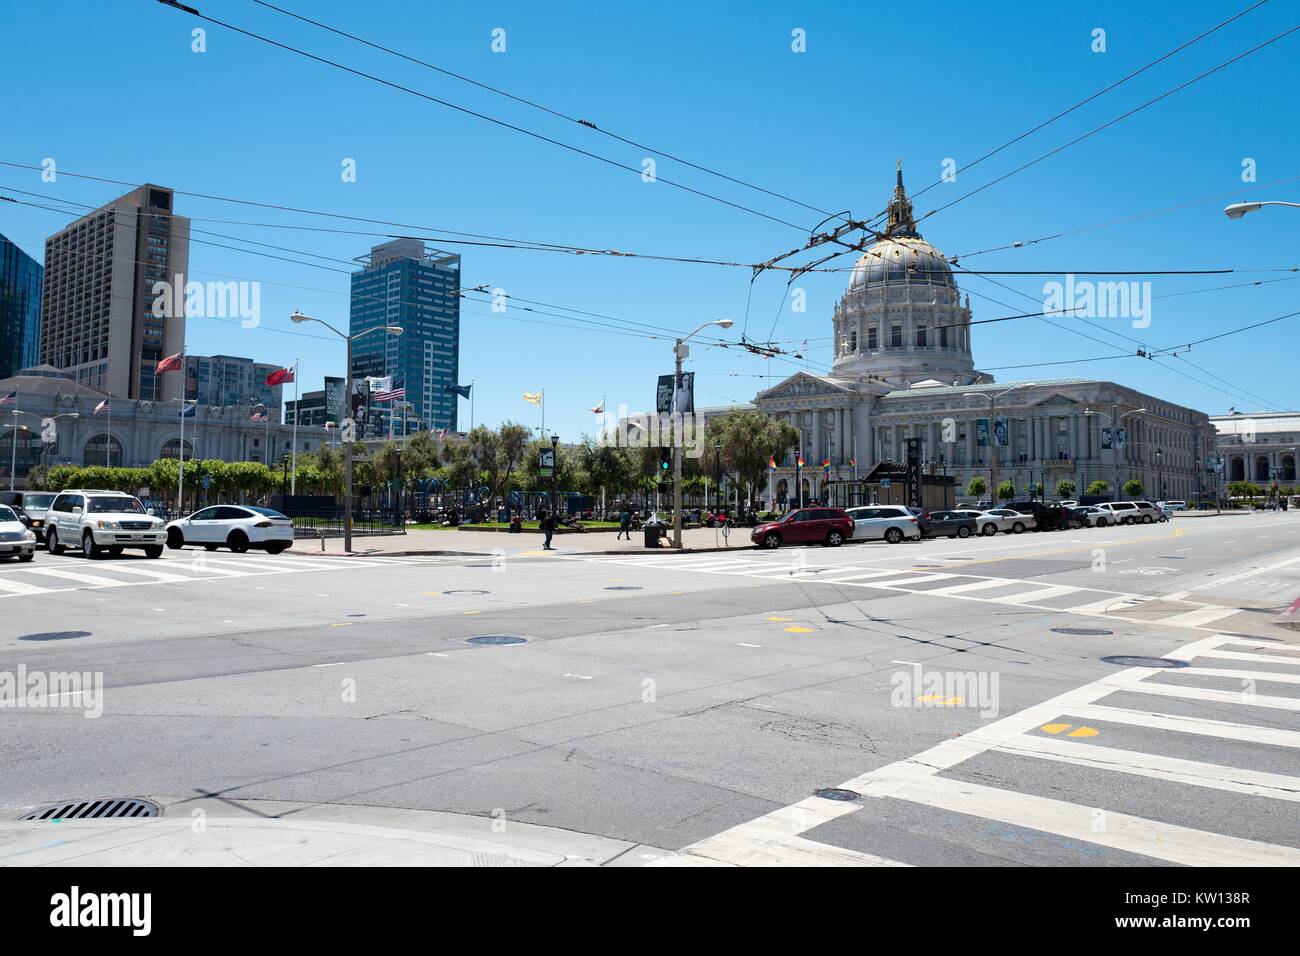 View of San Francisco's Civic Center neighborhood, including city hall, with overhead transit wires, vehicles and gay pride flags visible, San Francisco, California, June, 2016. Stock Photo